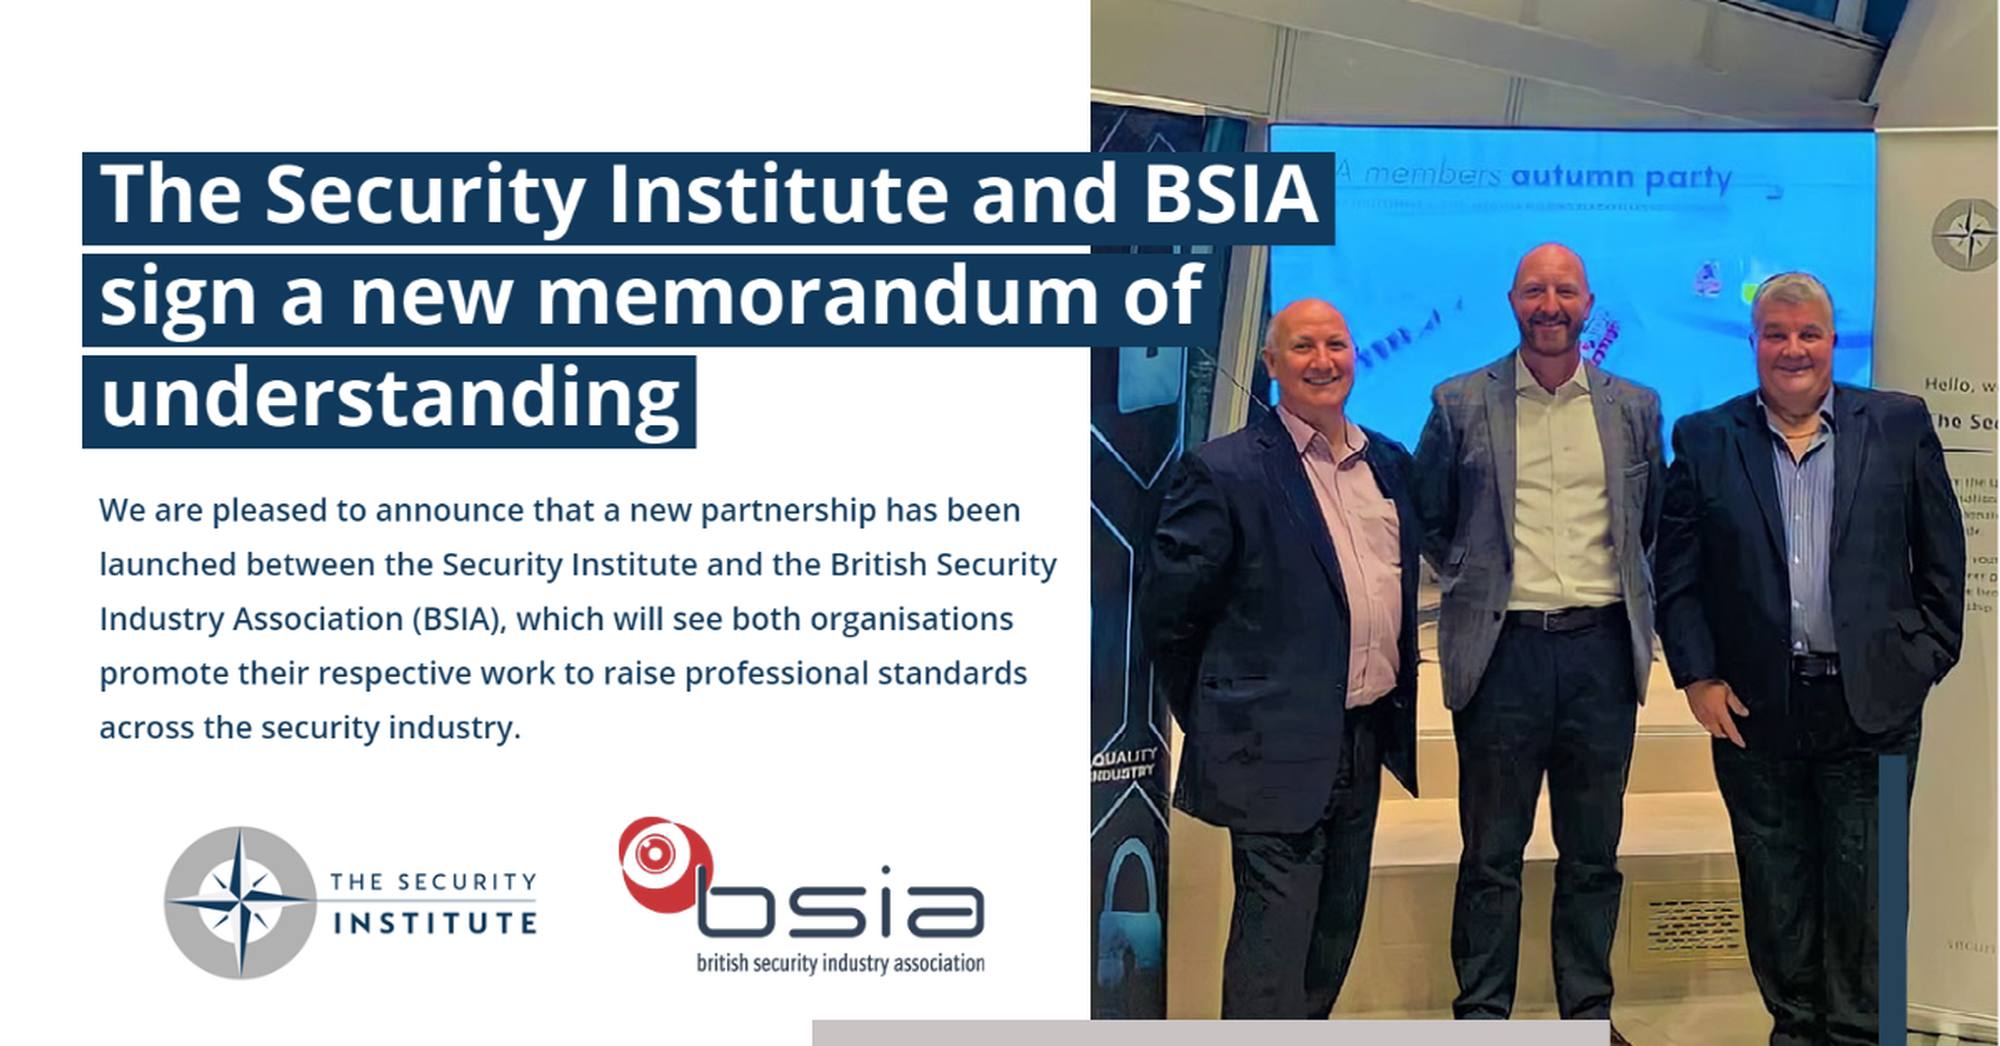 The Security Institute and BSIA Launch a New Partnership